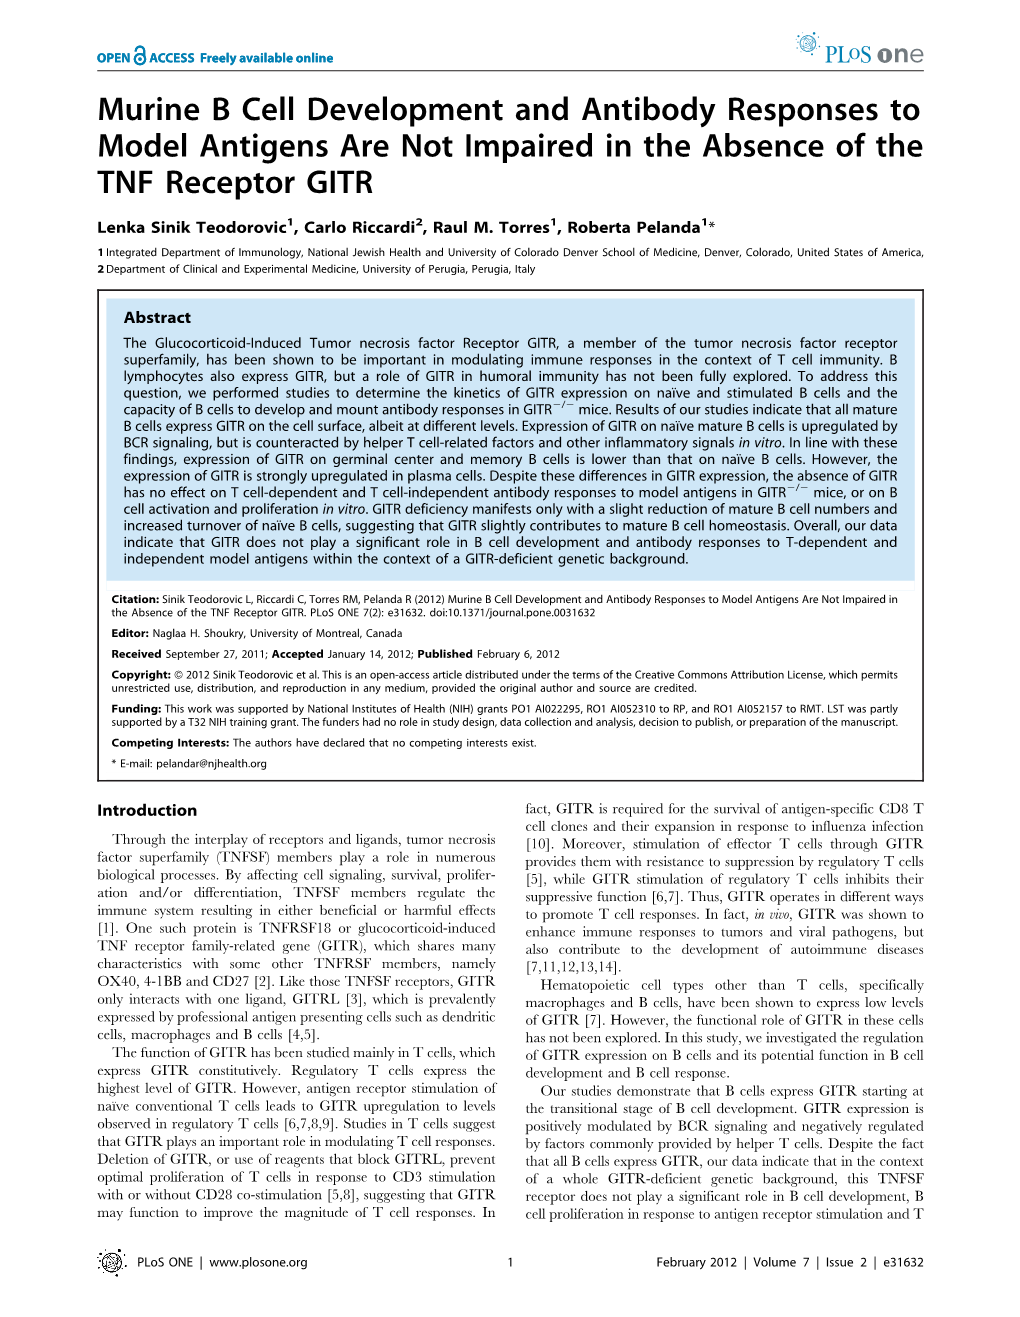 Murine B Cell Development and Antibody Responses to Model Antigens Are Not Impaired in the Absence of the TNF Receptor GITR